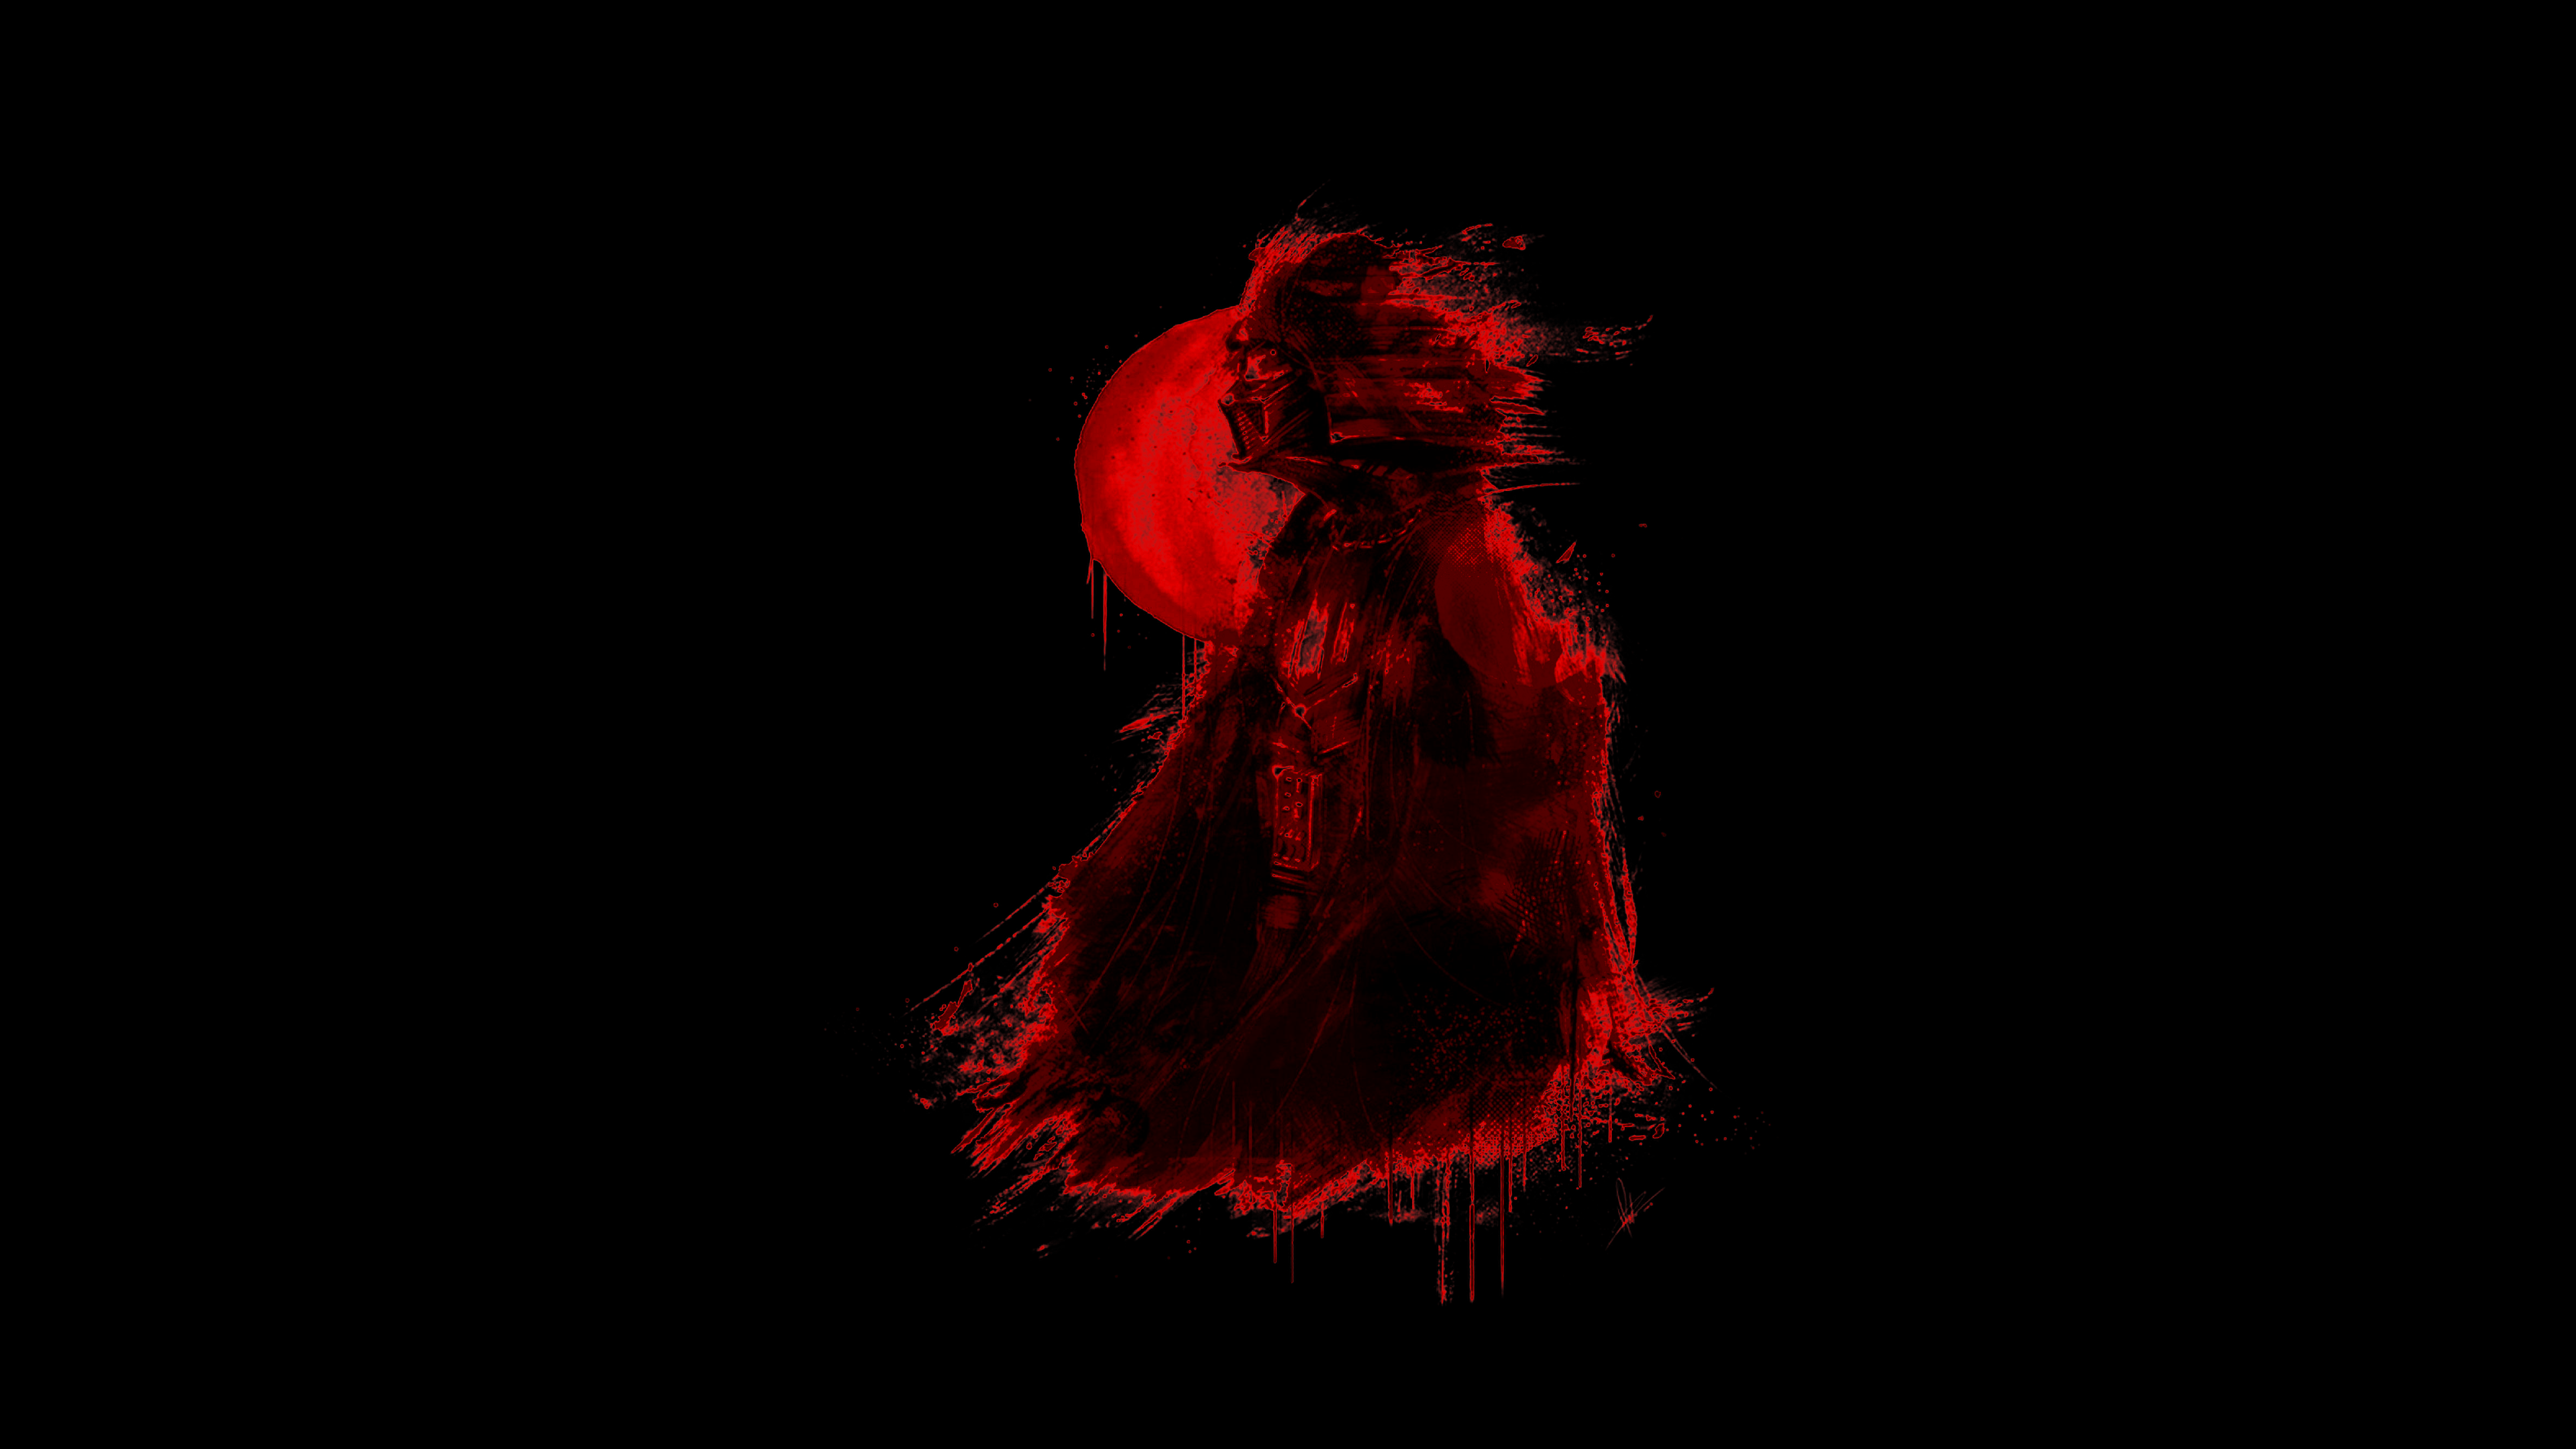 Stylized Red Vader for Black Amoled Screens [3840x2160]. Stylized